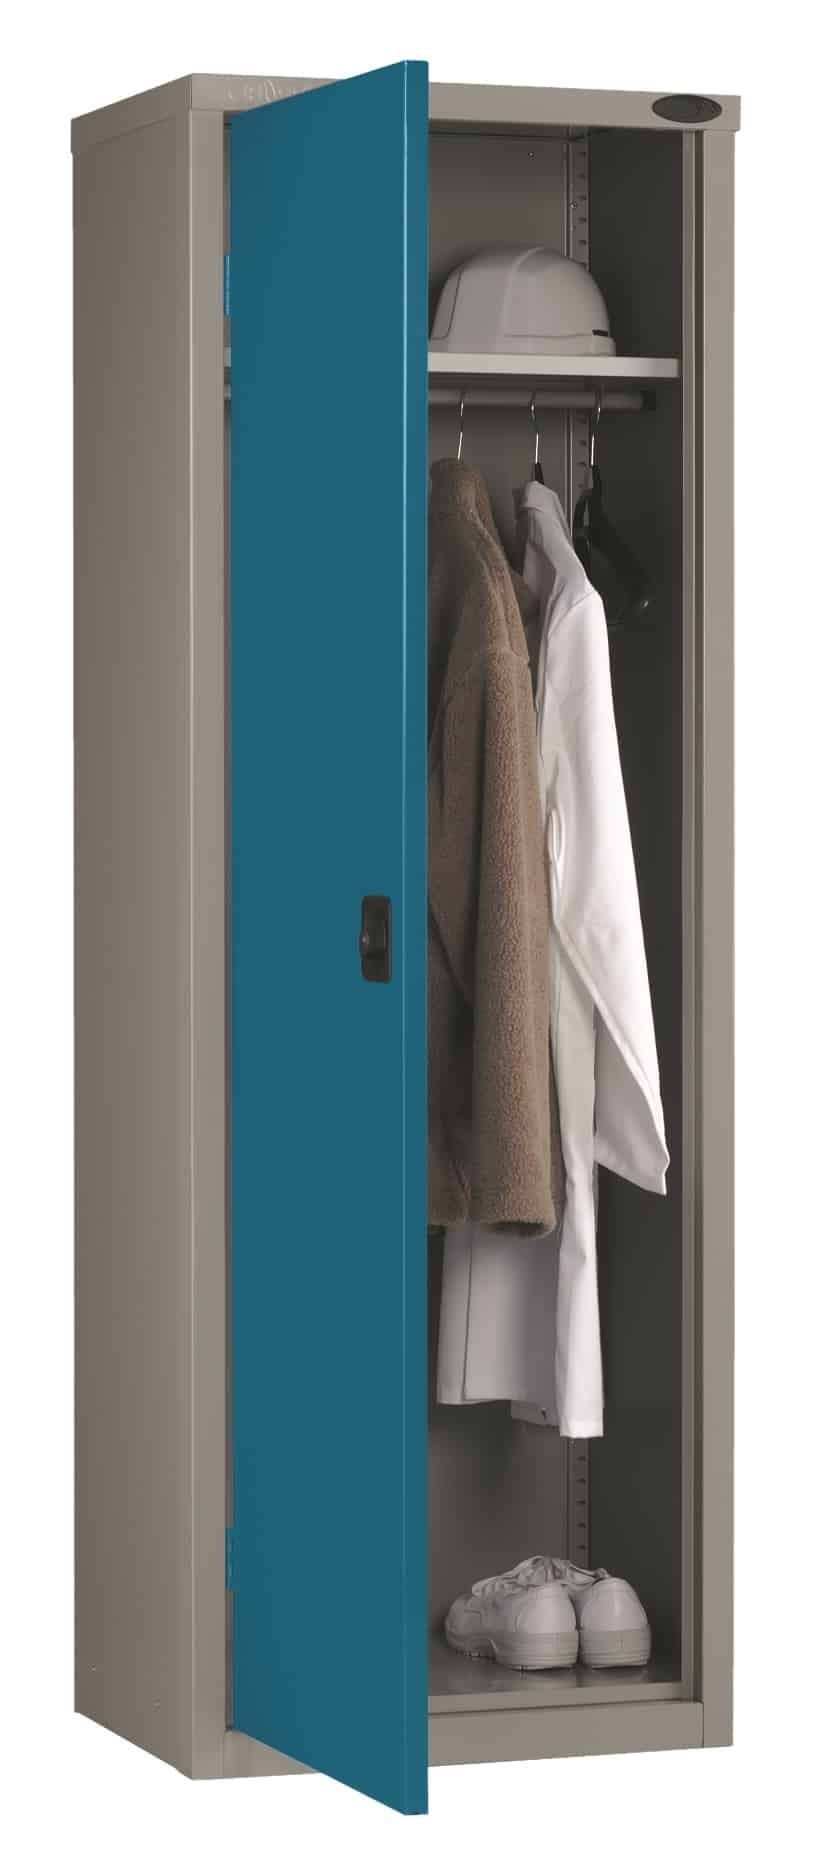 Probe Industrial Slim Wardrobe With Shelf & Hanging Rail – Lockers For  Schools And Leisure Within Rail Clothes Storage Cupboard Wardrobes (View 11 of 20)